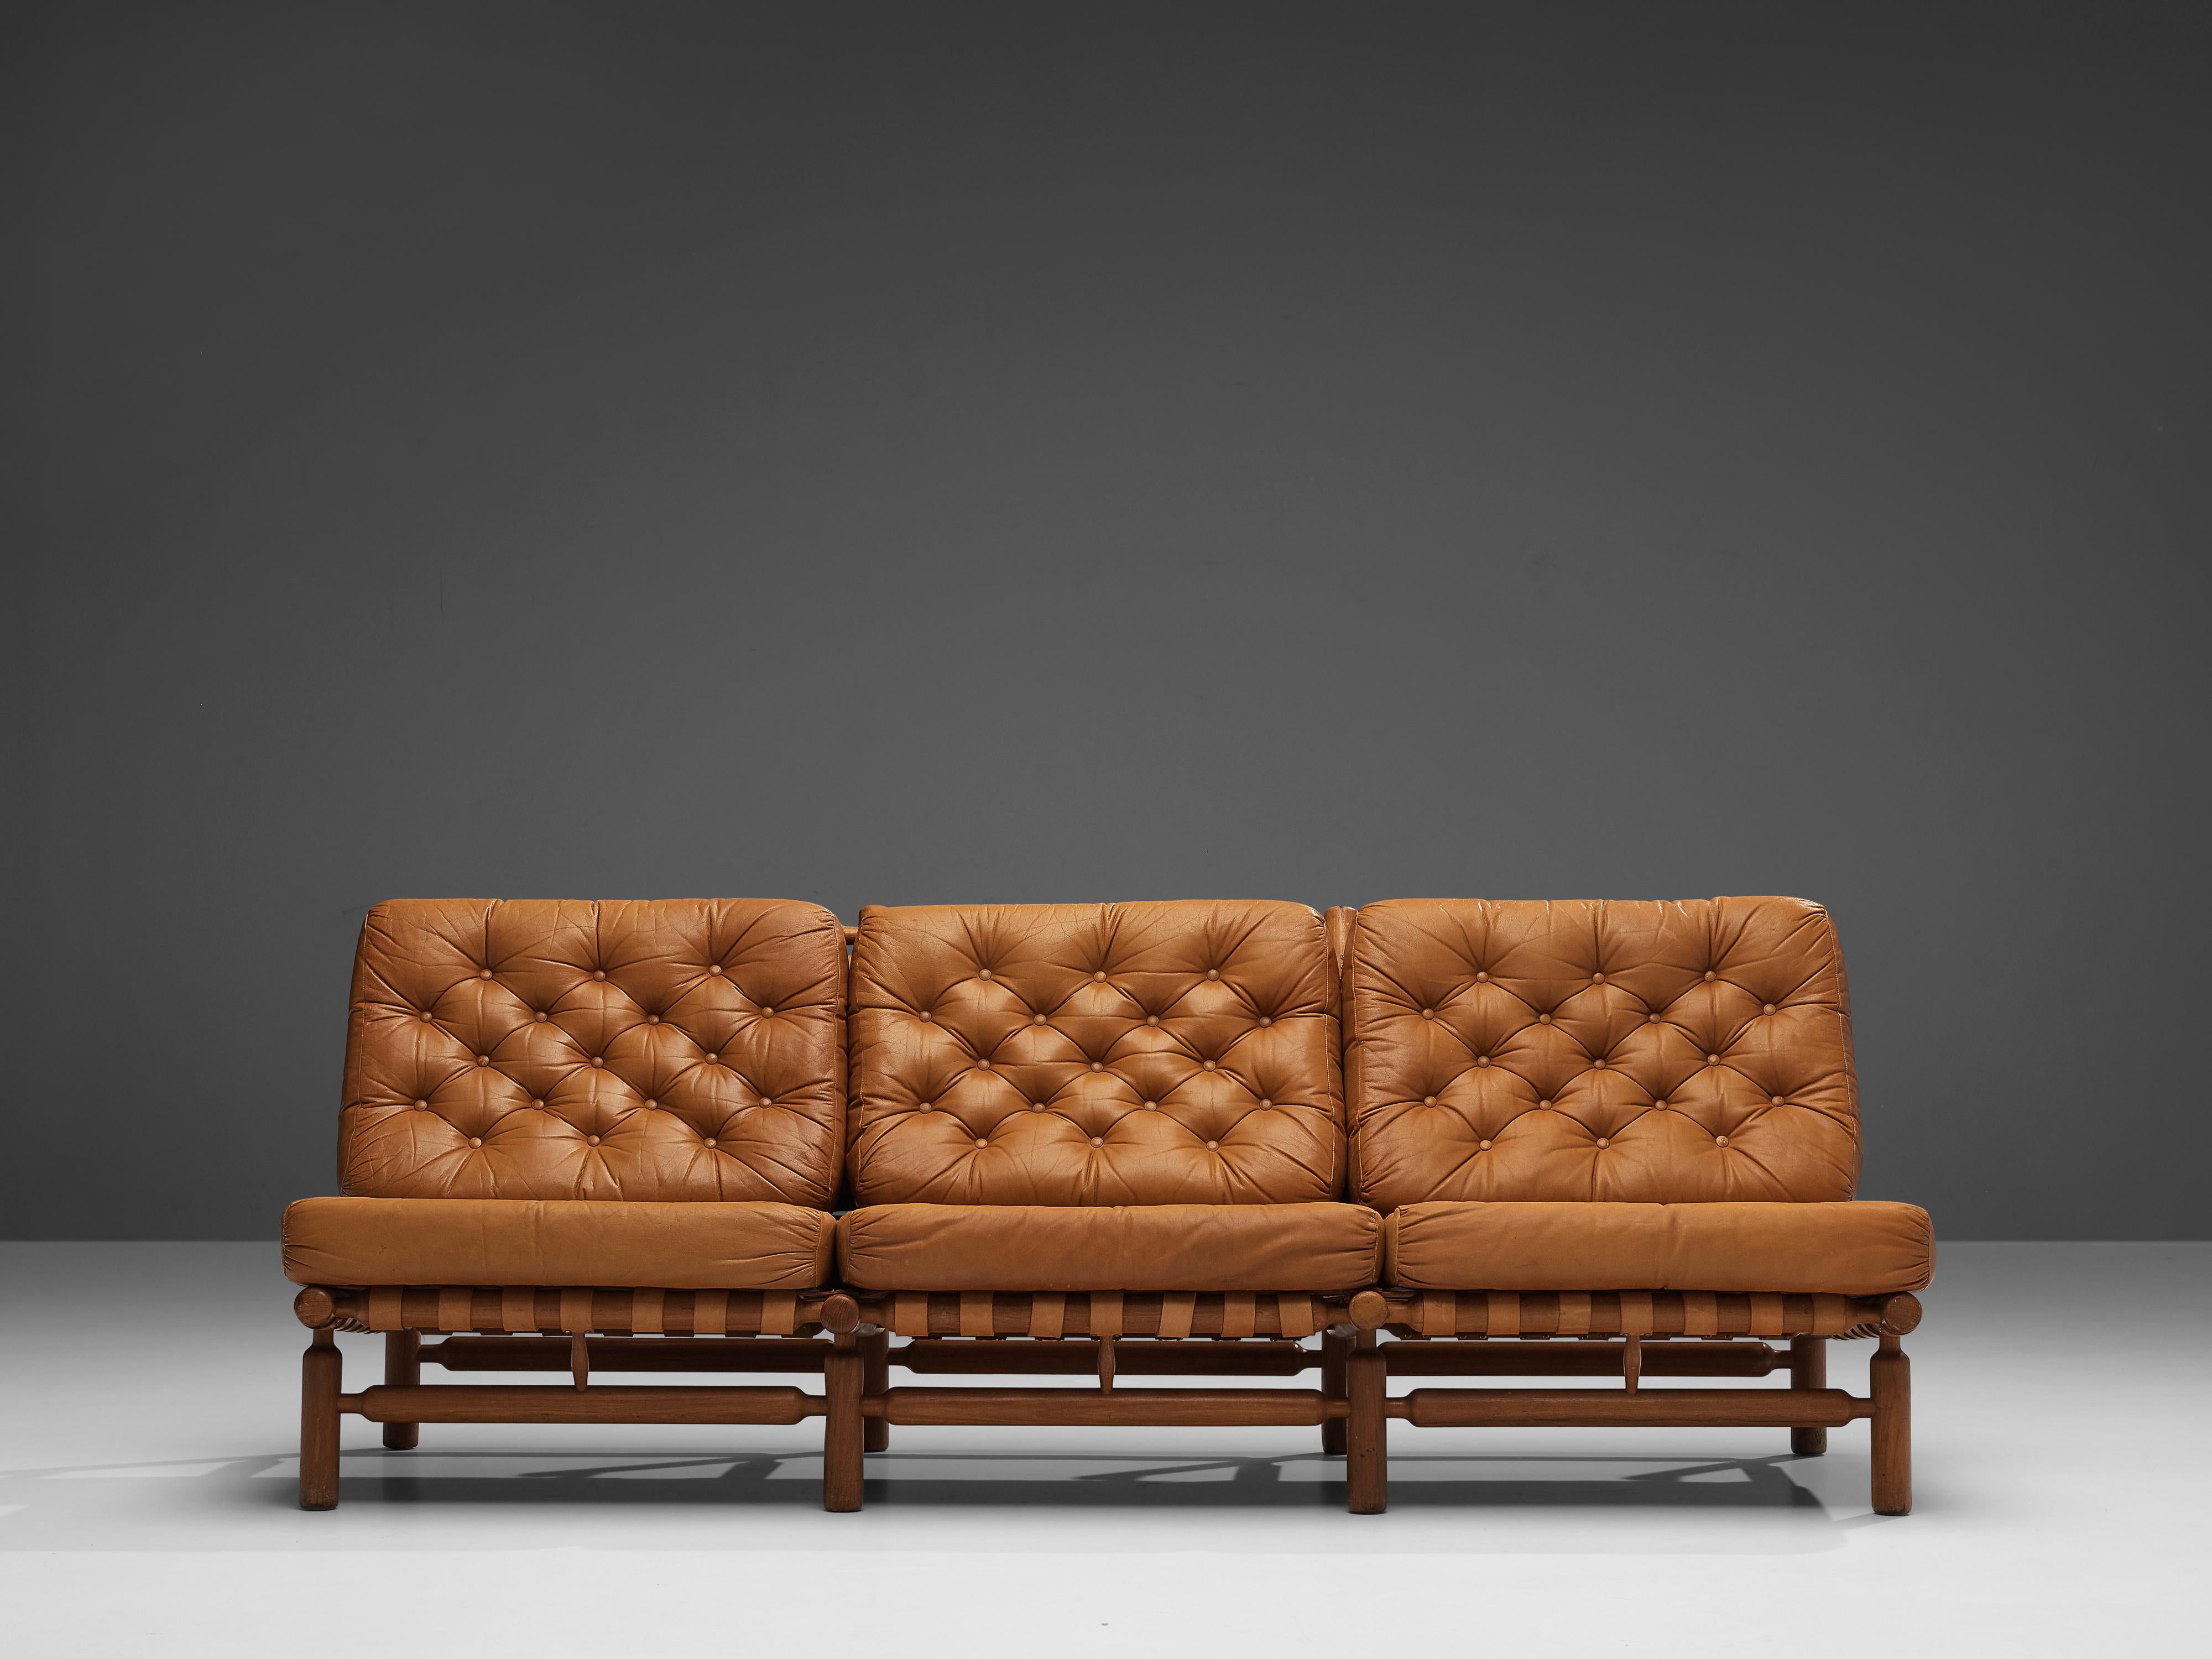 Ilmari Tapiovaara for Esposizione La Permanente Mobili, sofa, teak and leather, Finland, 1957. 

Three seat sofa by Finnish designer Ilmari Tapiovaara. This organic design features beautiful patinated leather support strapping within a teak frame